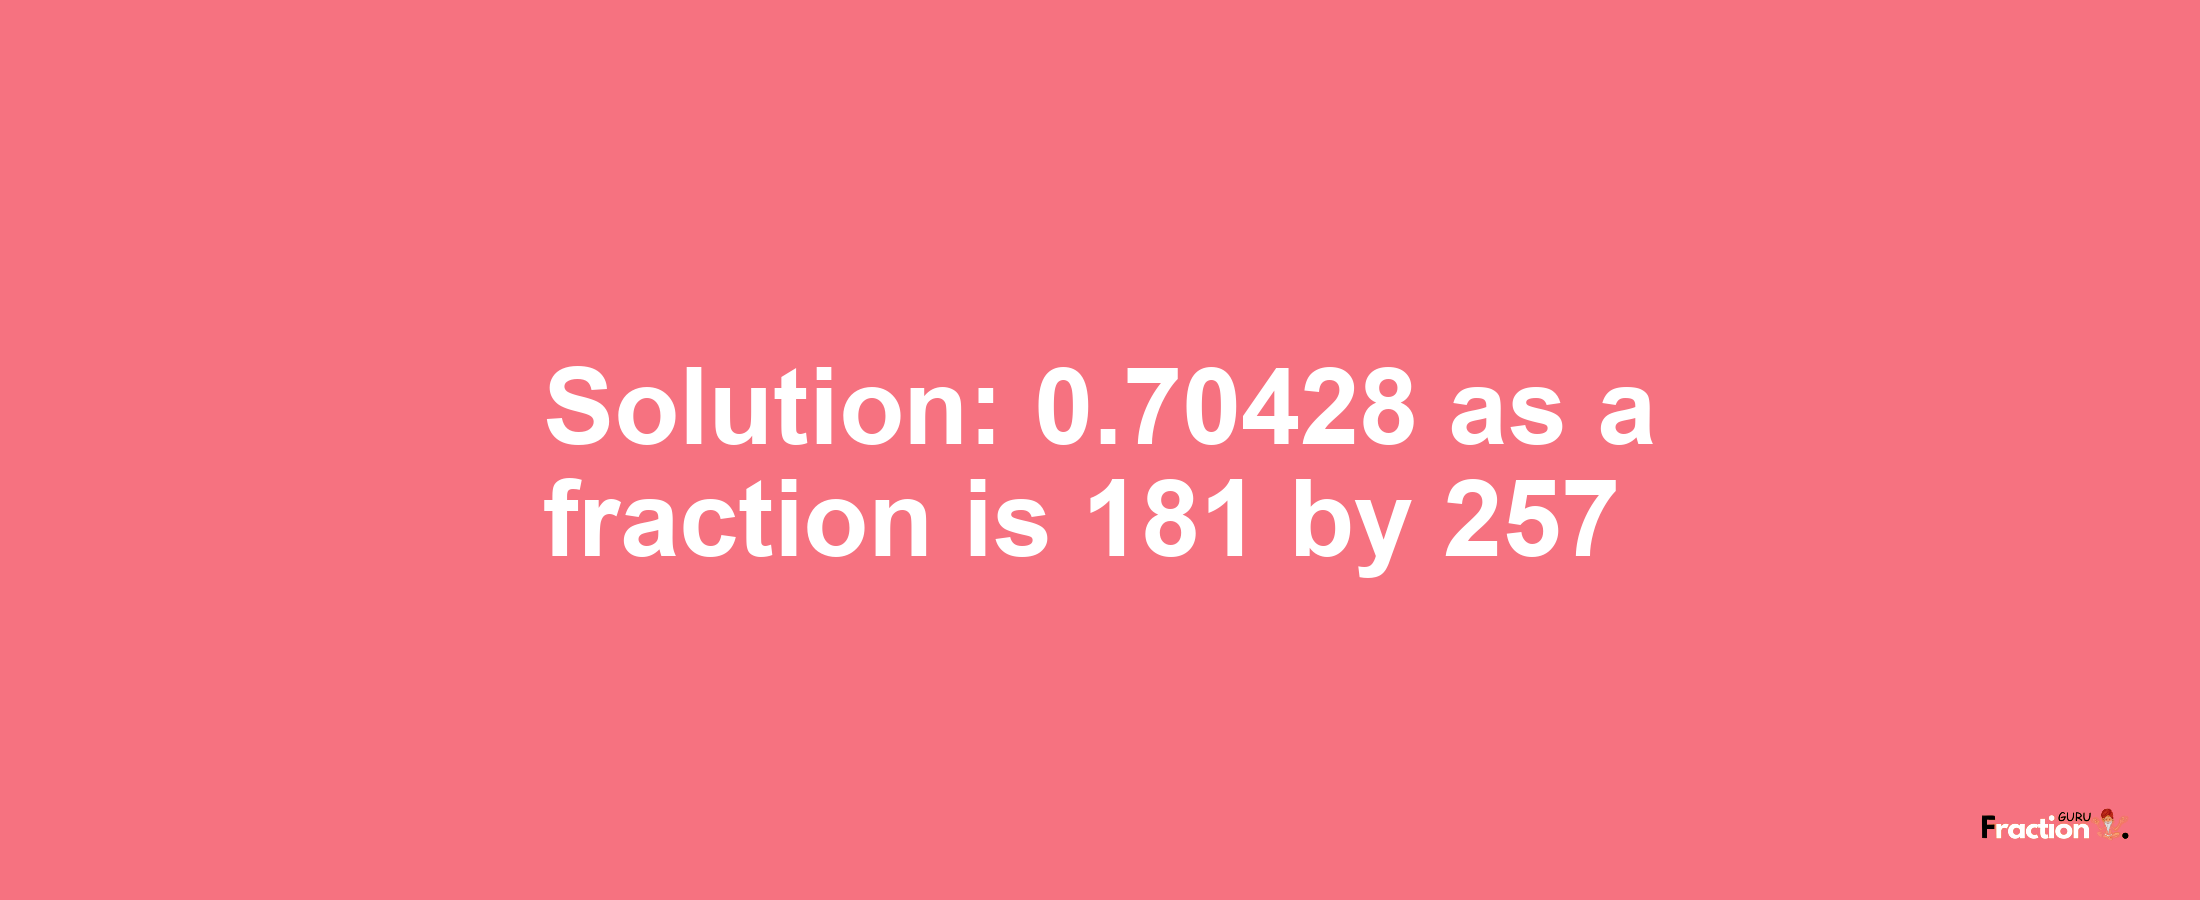 Solution:0.70428 as a fraction is 181/257